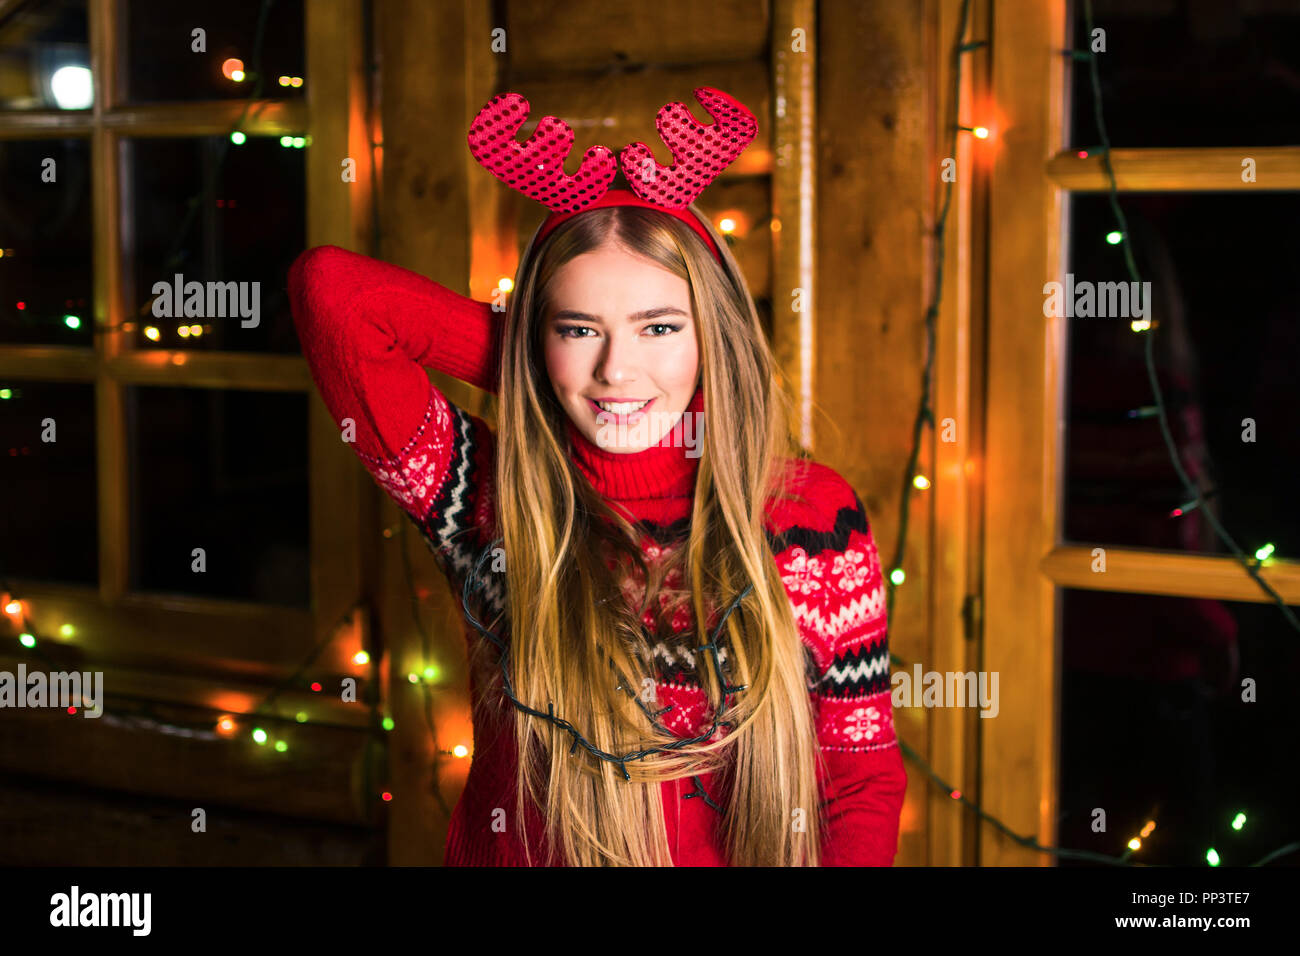 Beautiful girl with festive lights in a log cabin Stock Photo